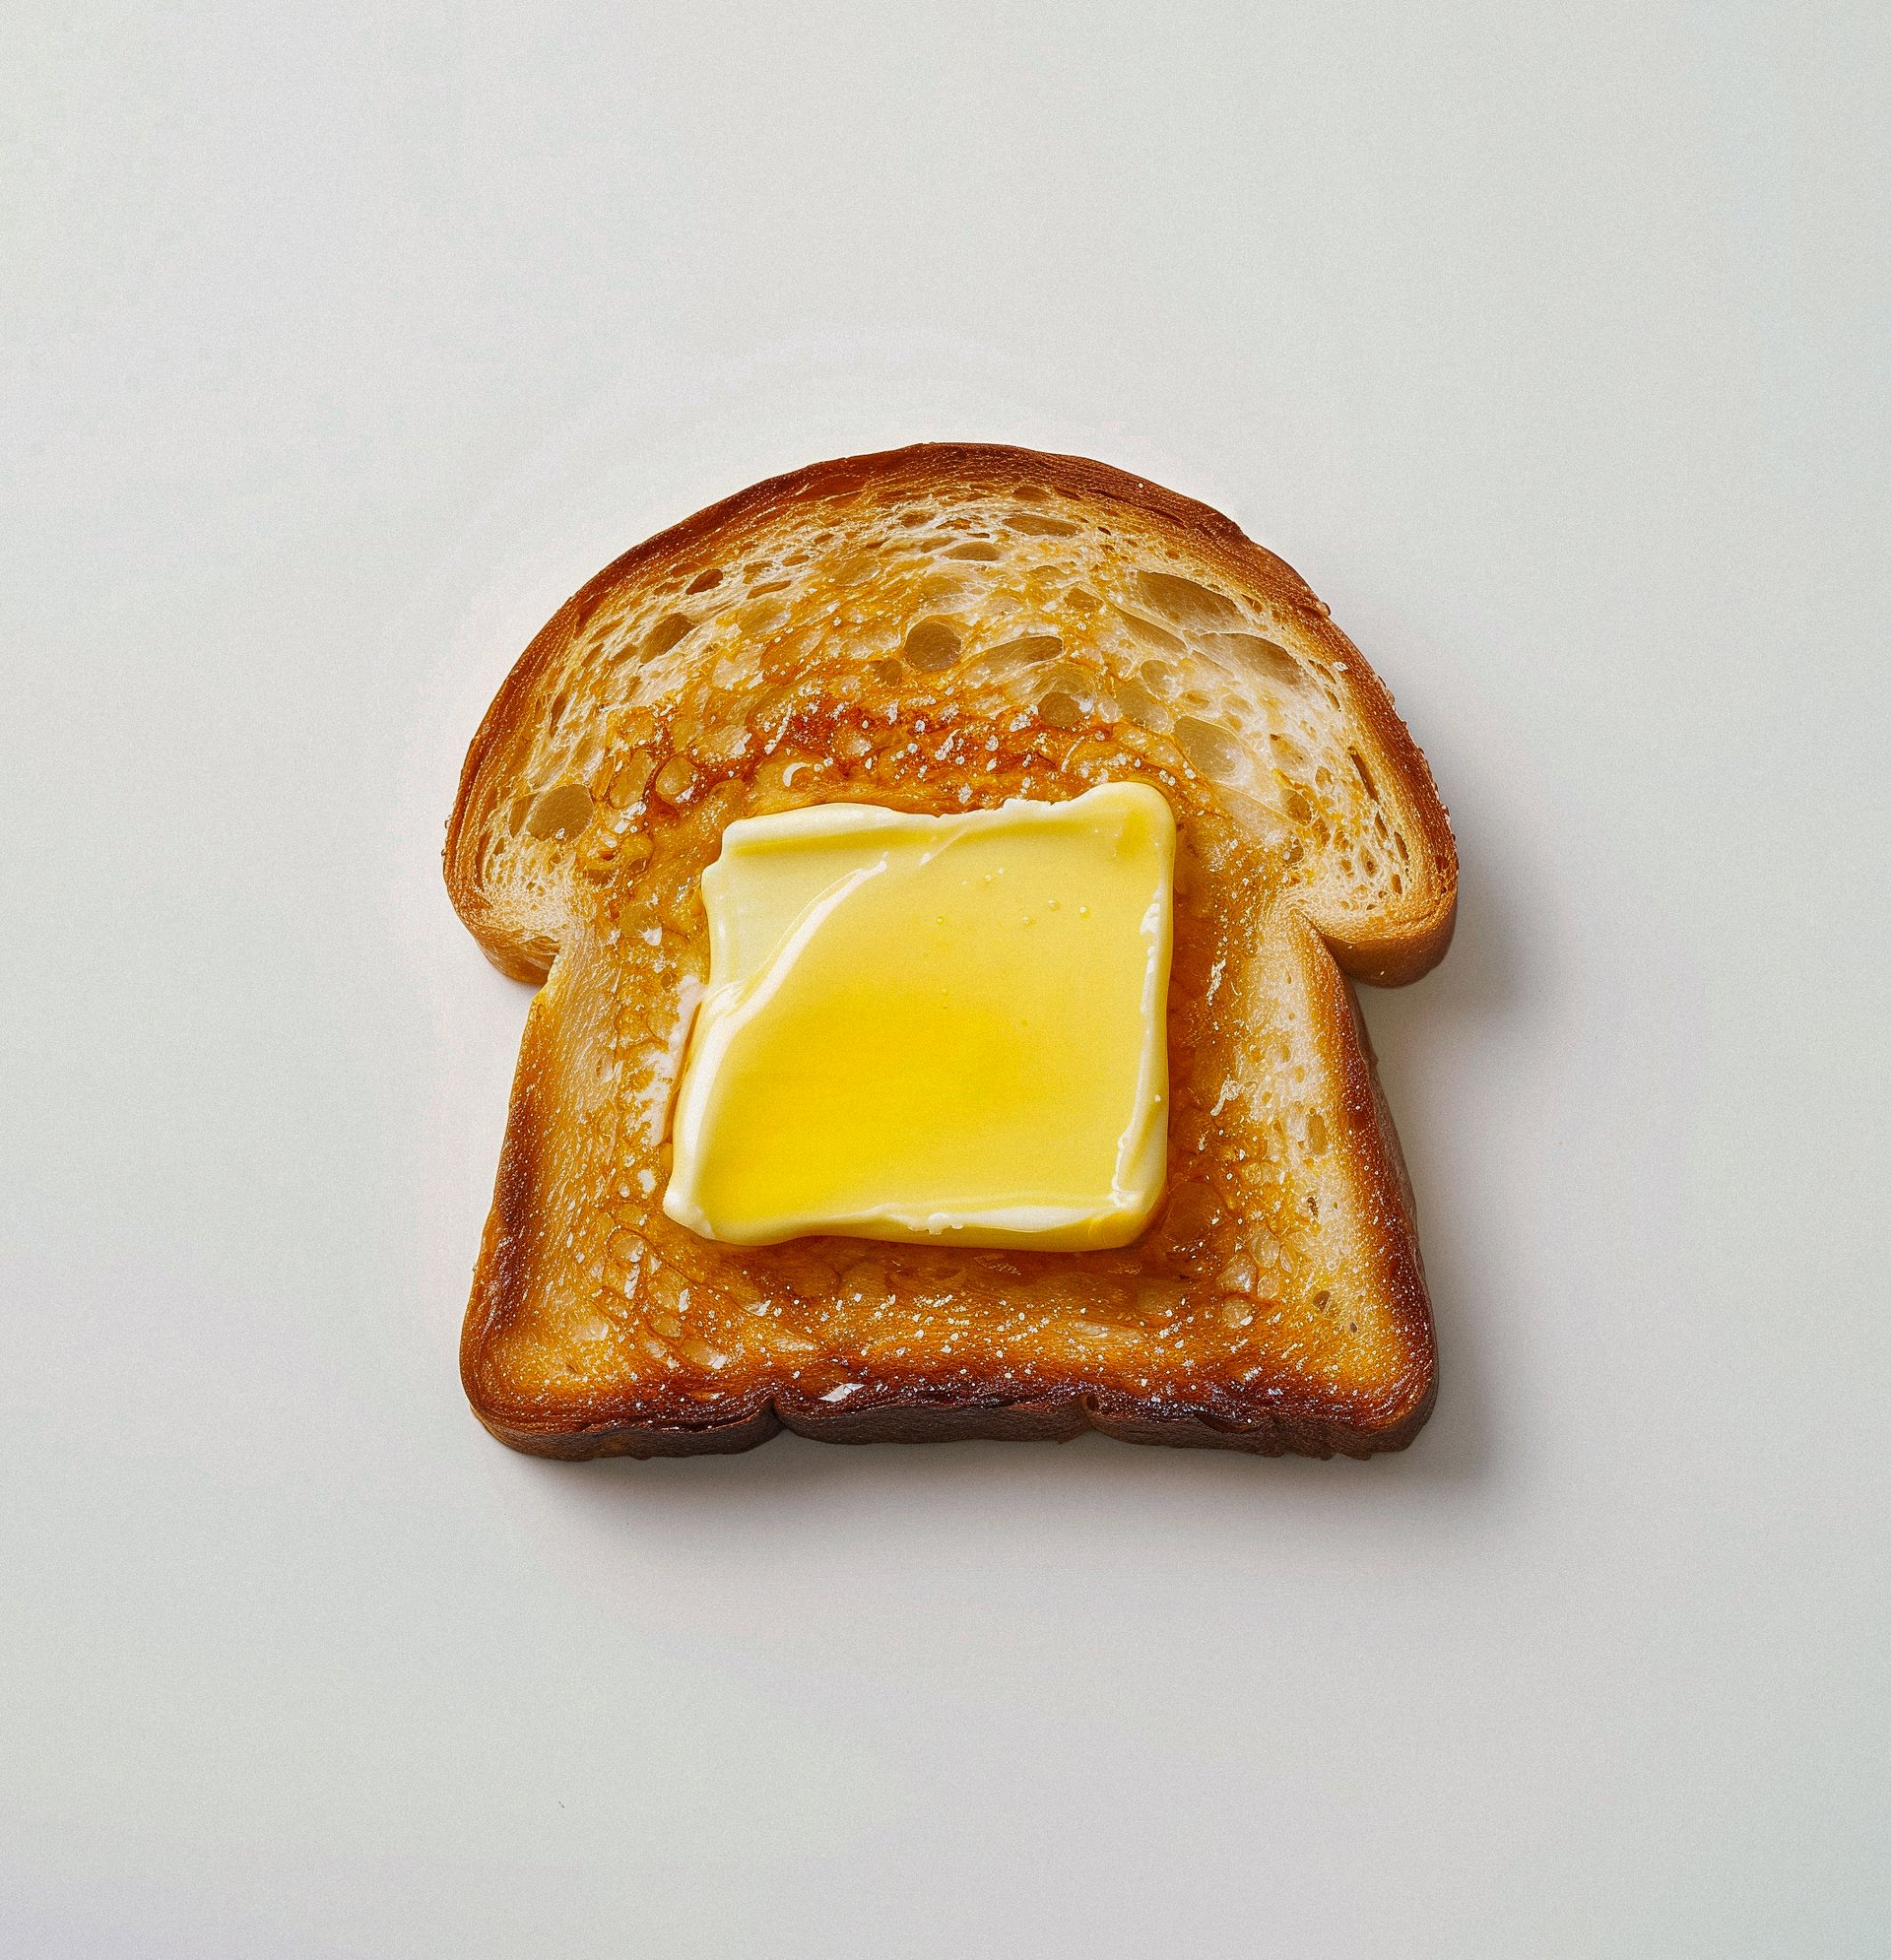 Toast with honey and butter